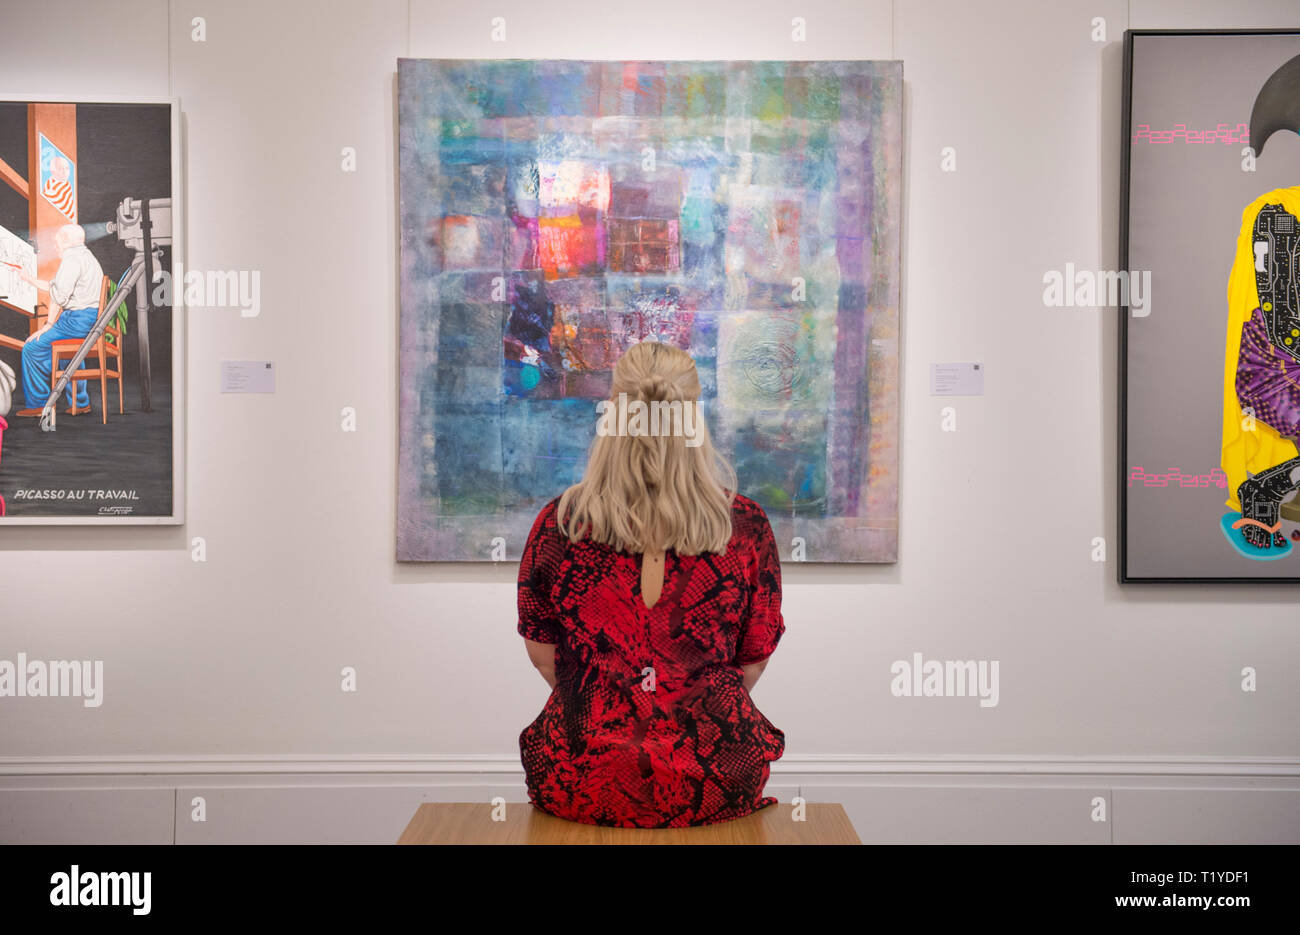 Sotheby’s London, UK. 29 March, 2019. Pre-sale exhibition of Modern and Contemporary African Art, showing the work of artists from across the African diaspora. Image: Hussein Shariffe, Birth and Death of the Stars. Estimate £12,000-18,000. Credit: Malcolm Park/Alamy Live News. Stock Photo